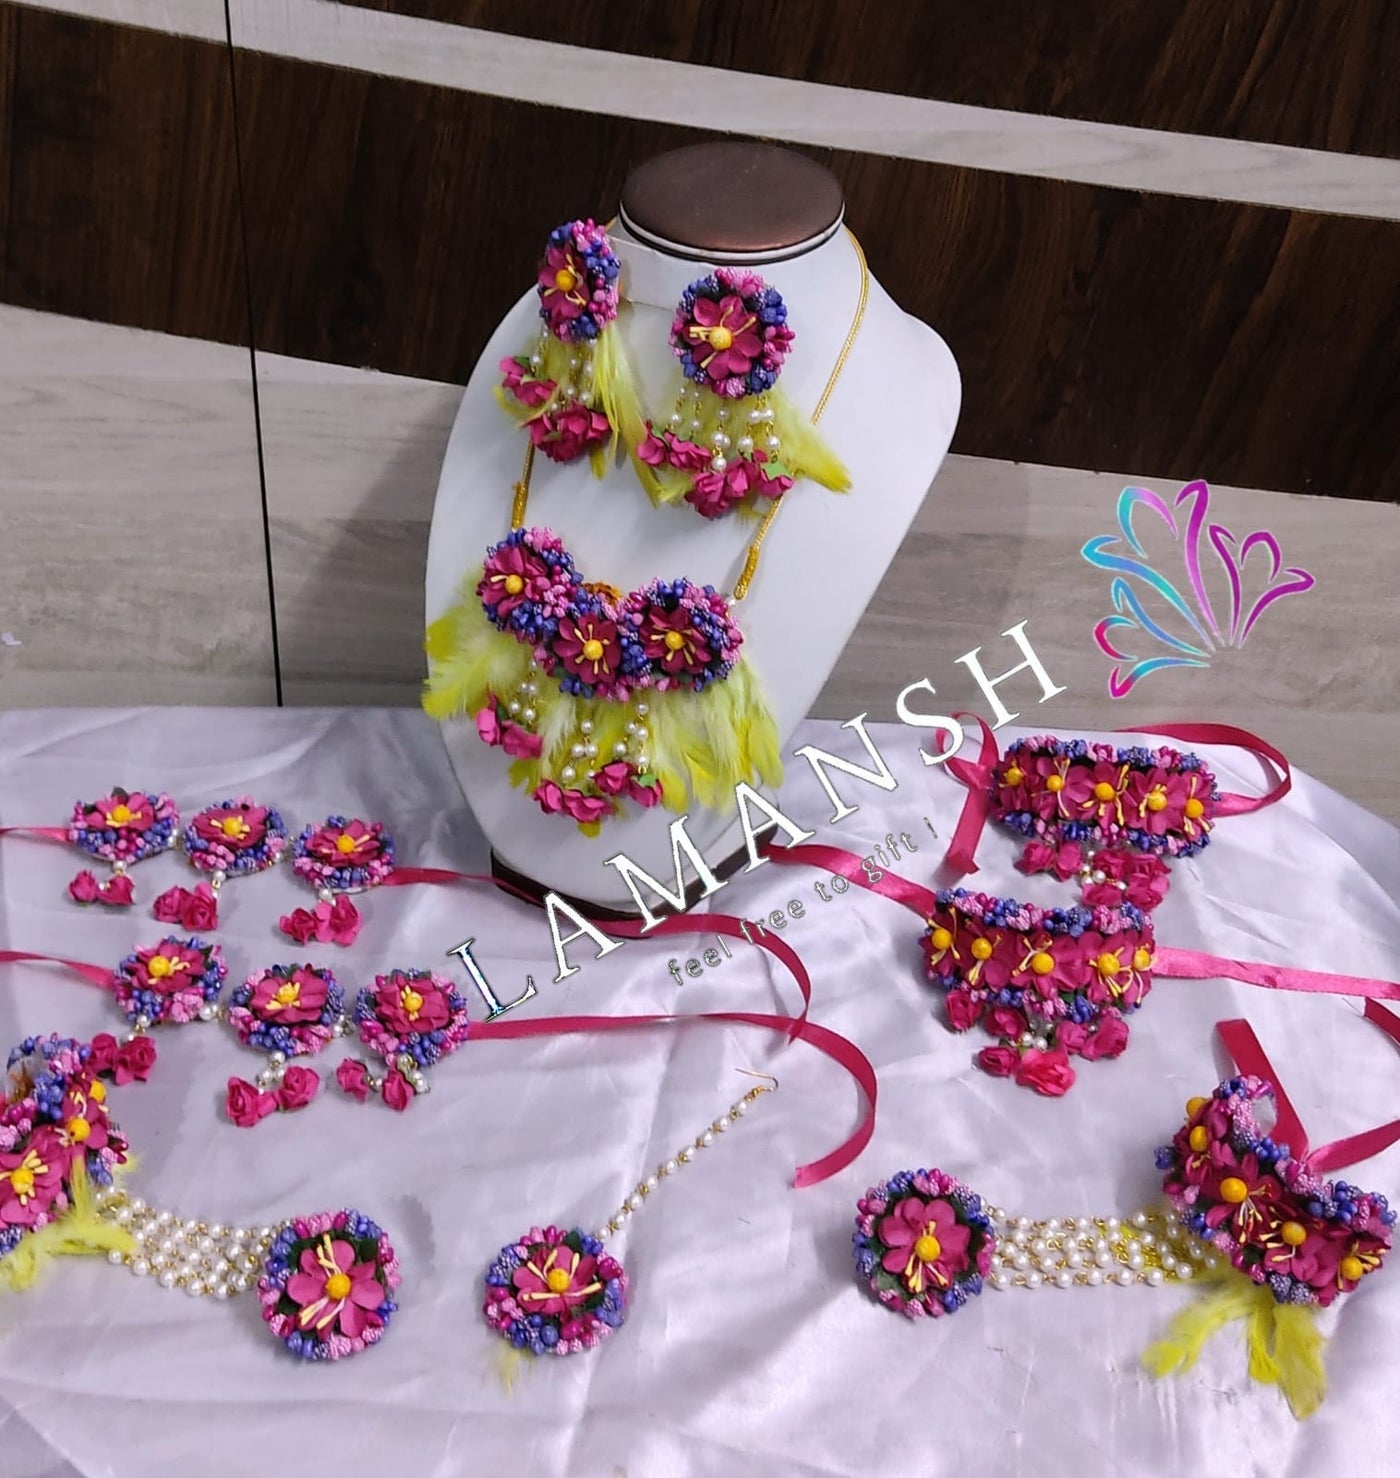 Lamansh Flower 🌺 Jewellery 1 Necklace, 2 Earrings ,1 Maangtika, 2 Bracelets Attached with Ring set, 2 Bajuband & 2 Payal / Pink-Purple LAMANSH® Bridal Floral 🌺 Jewellery Set for Baby Shower / Godbharai / Dohale Jevan Function